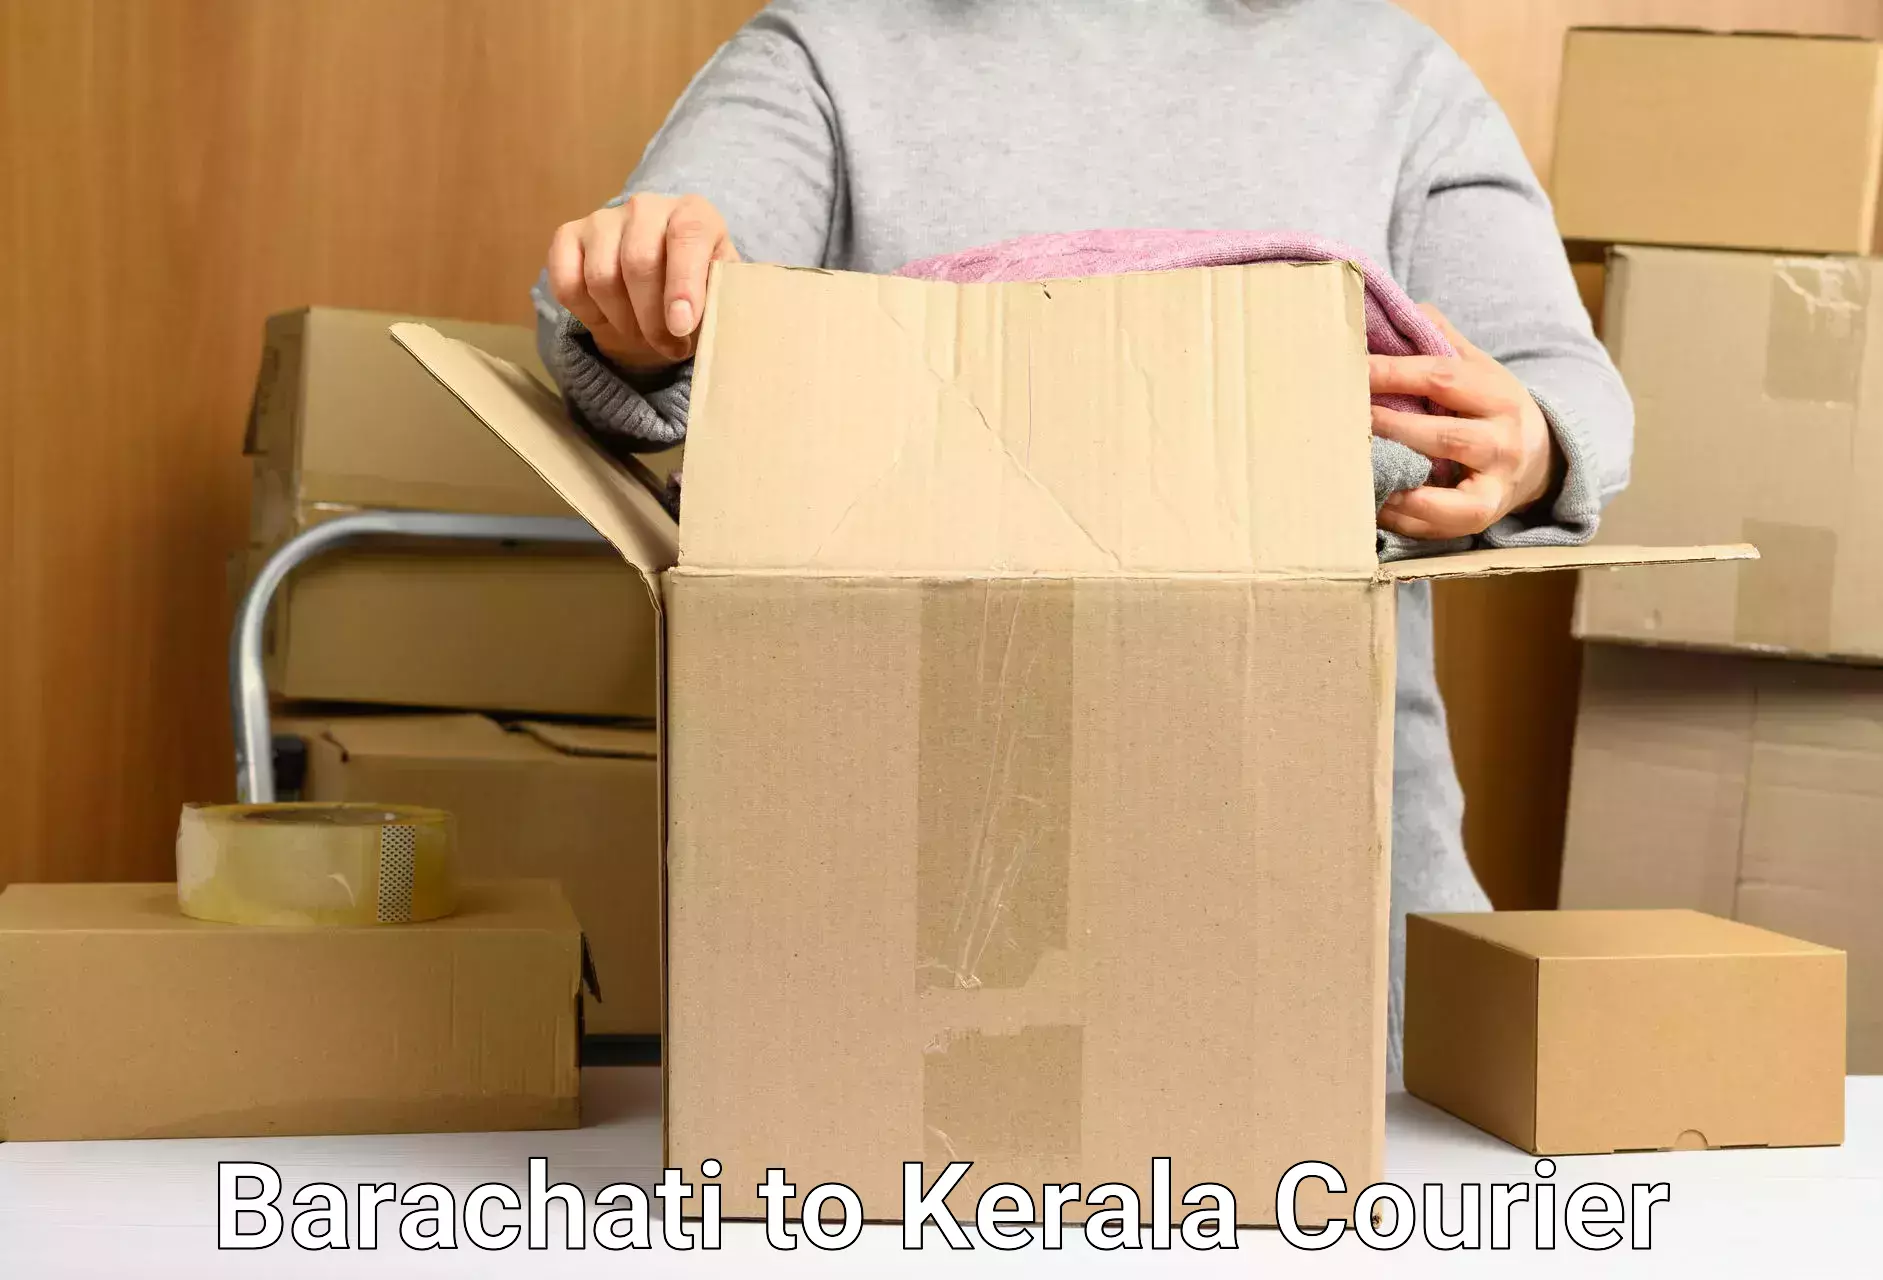 Express package delivery Barachati to Kerala